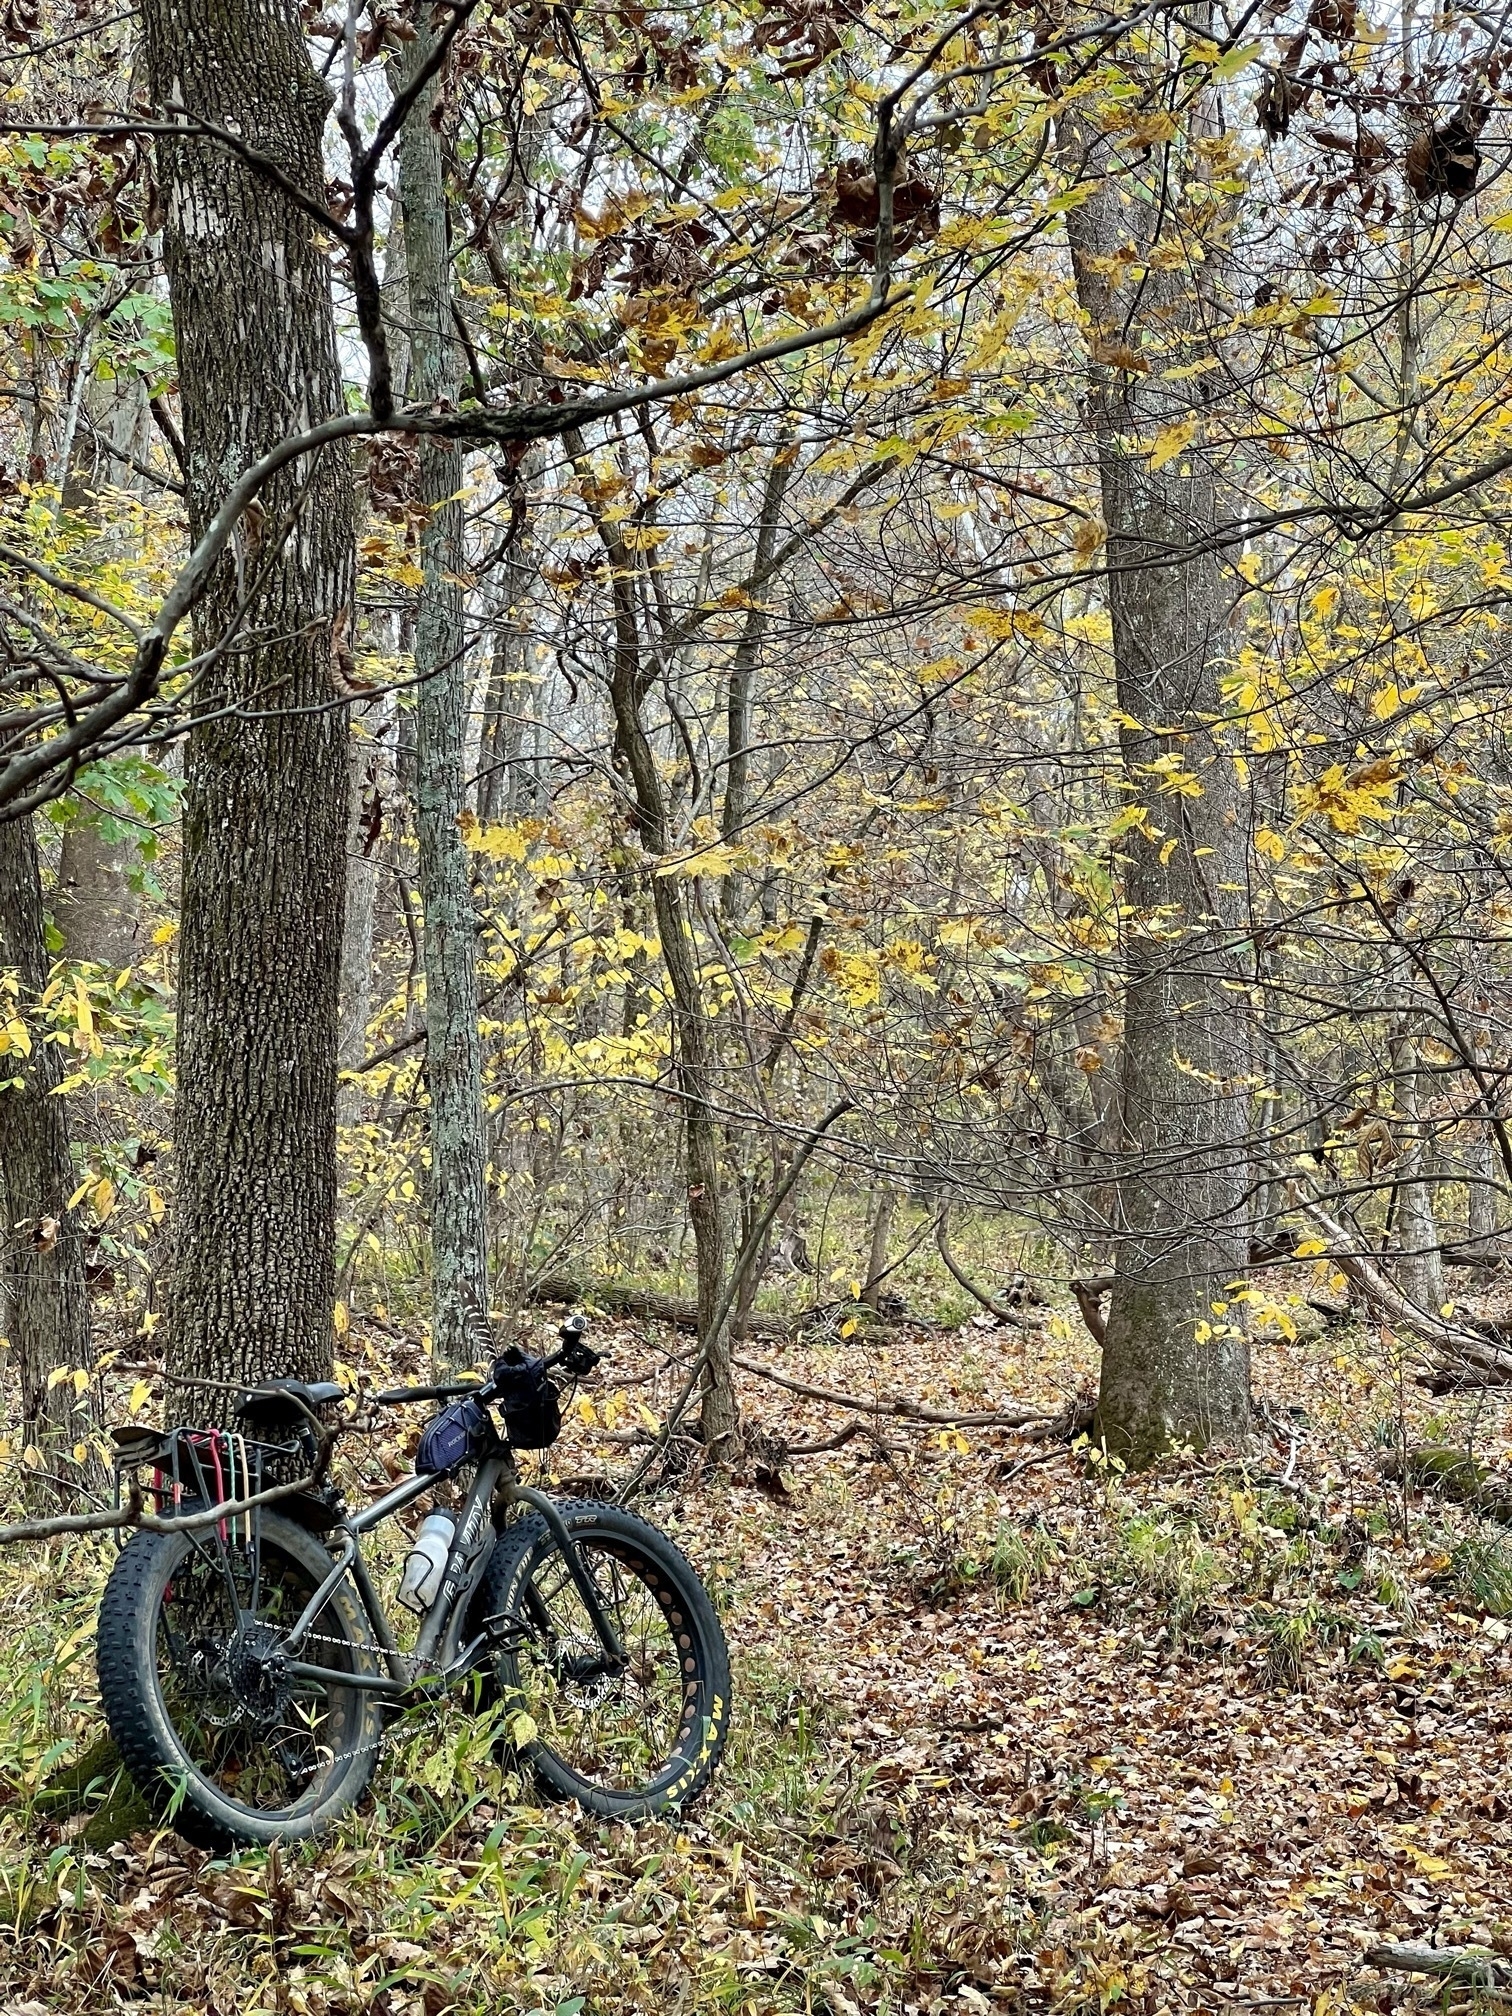 A fat tire bike leans against a tree in the woods. To the right is a leaf covered dry creek. The leaves in the trees are mostly yellow.